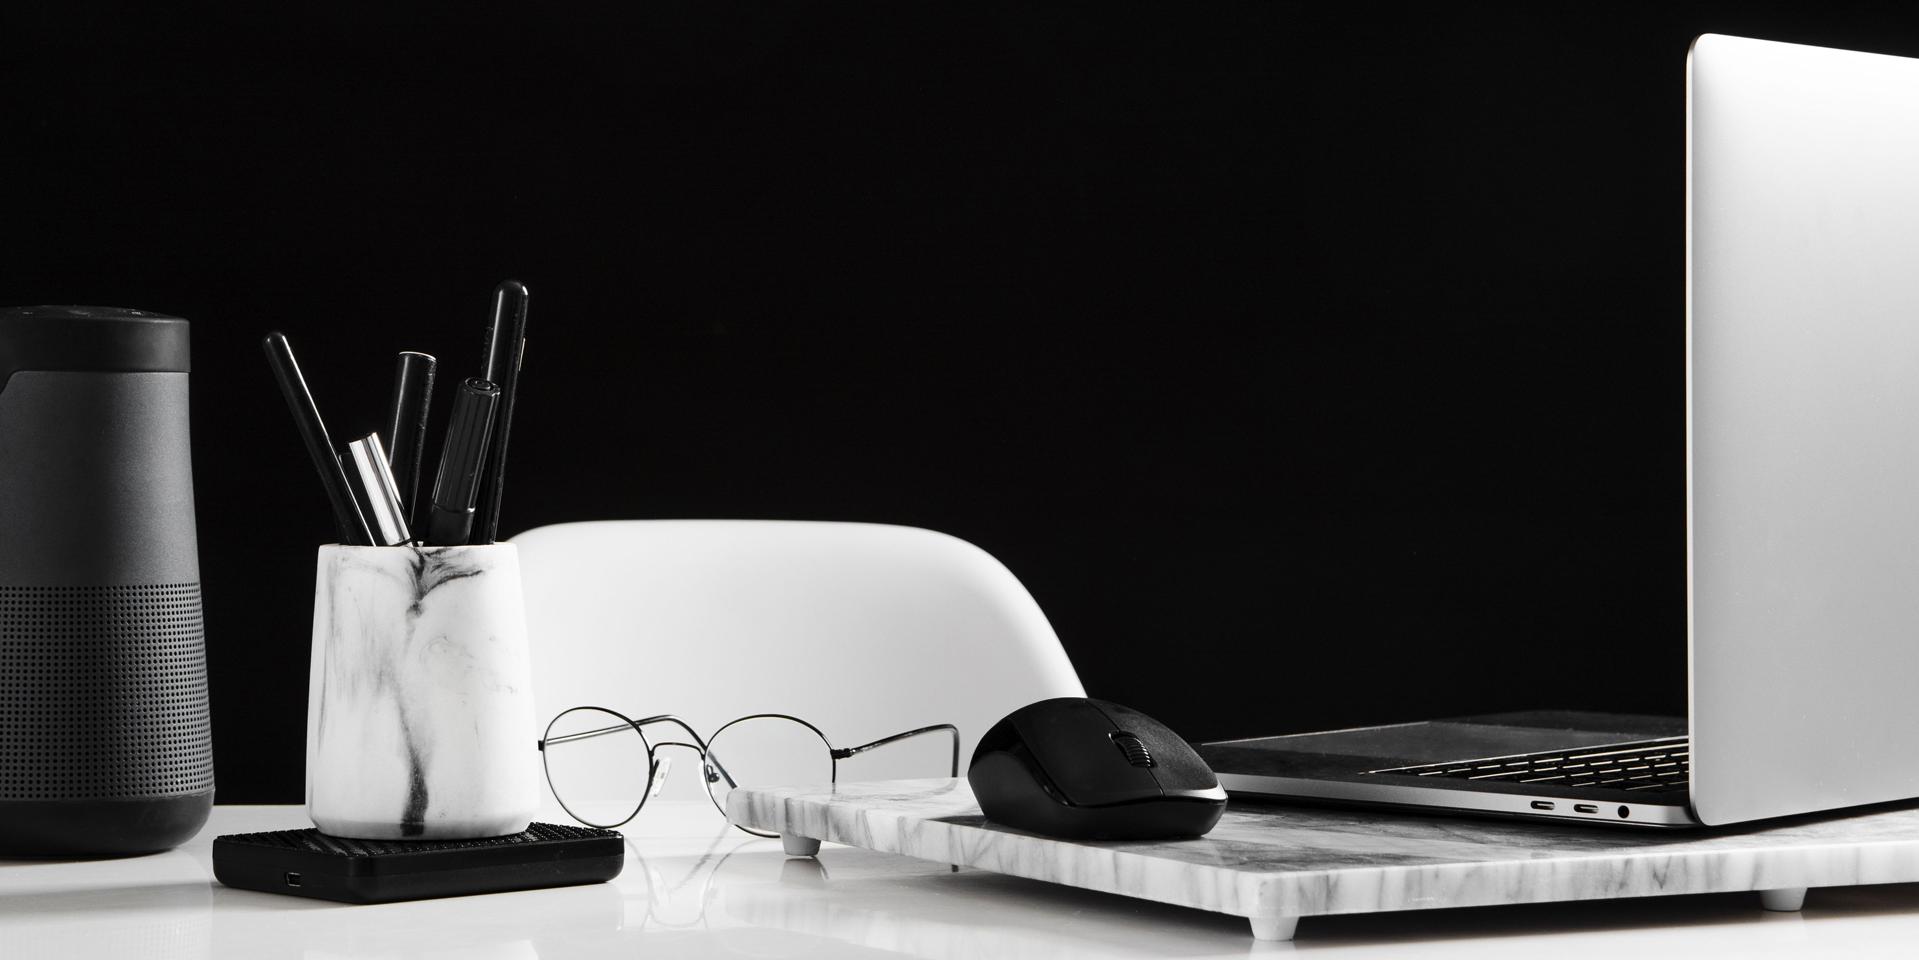 Tidy workspace showing an open laptop on the right side with a mouse. In front of it lies a pair of glasses. On the left side of the picture is a box with pens.